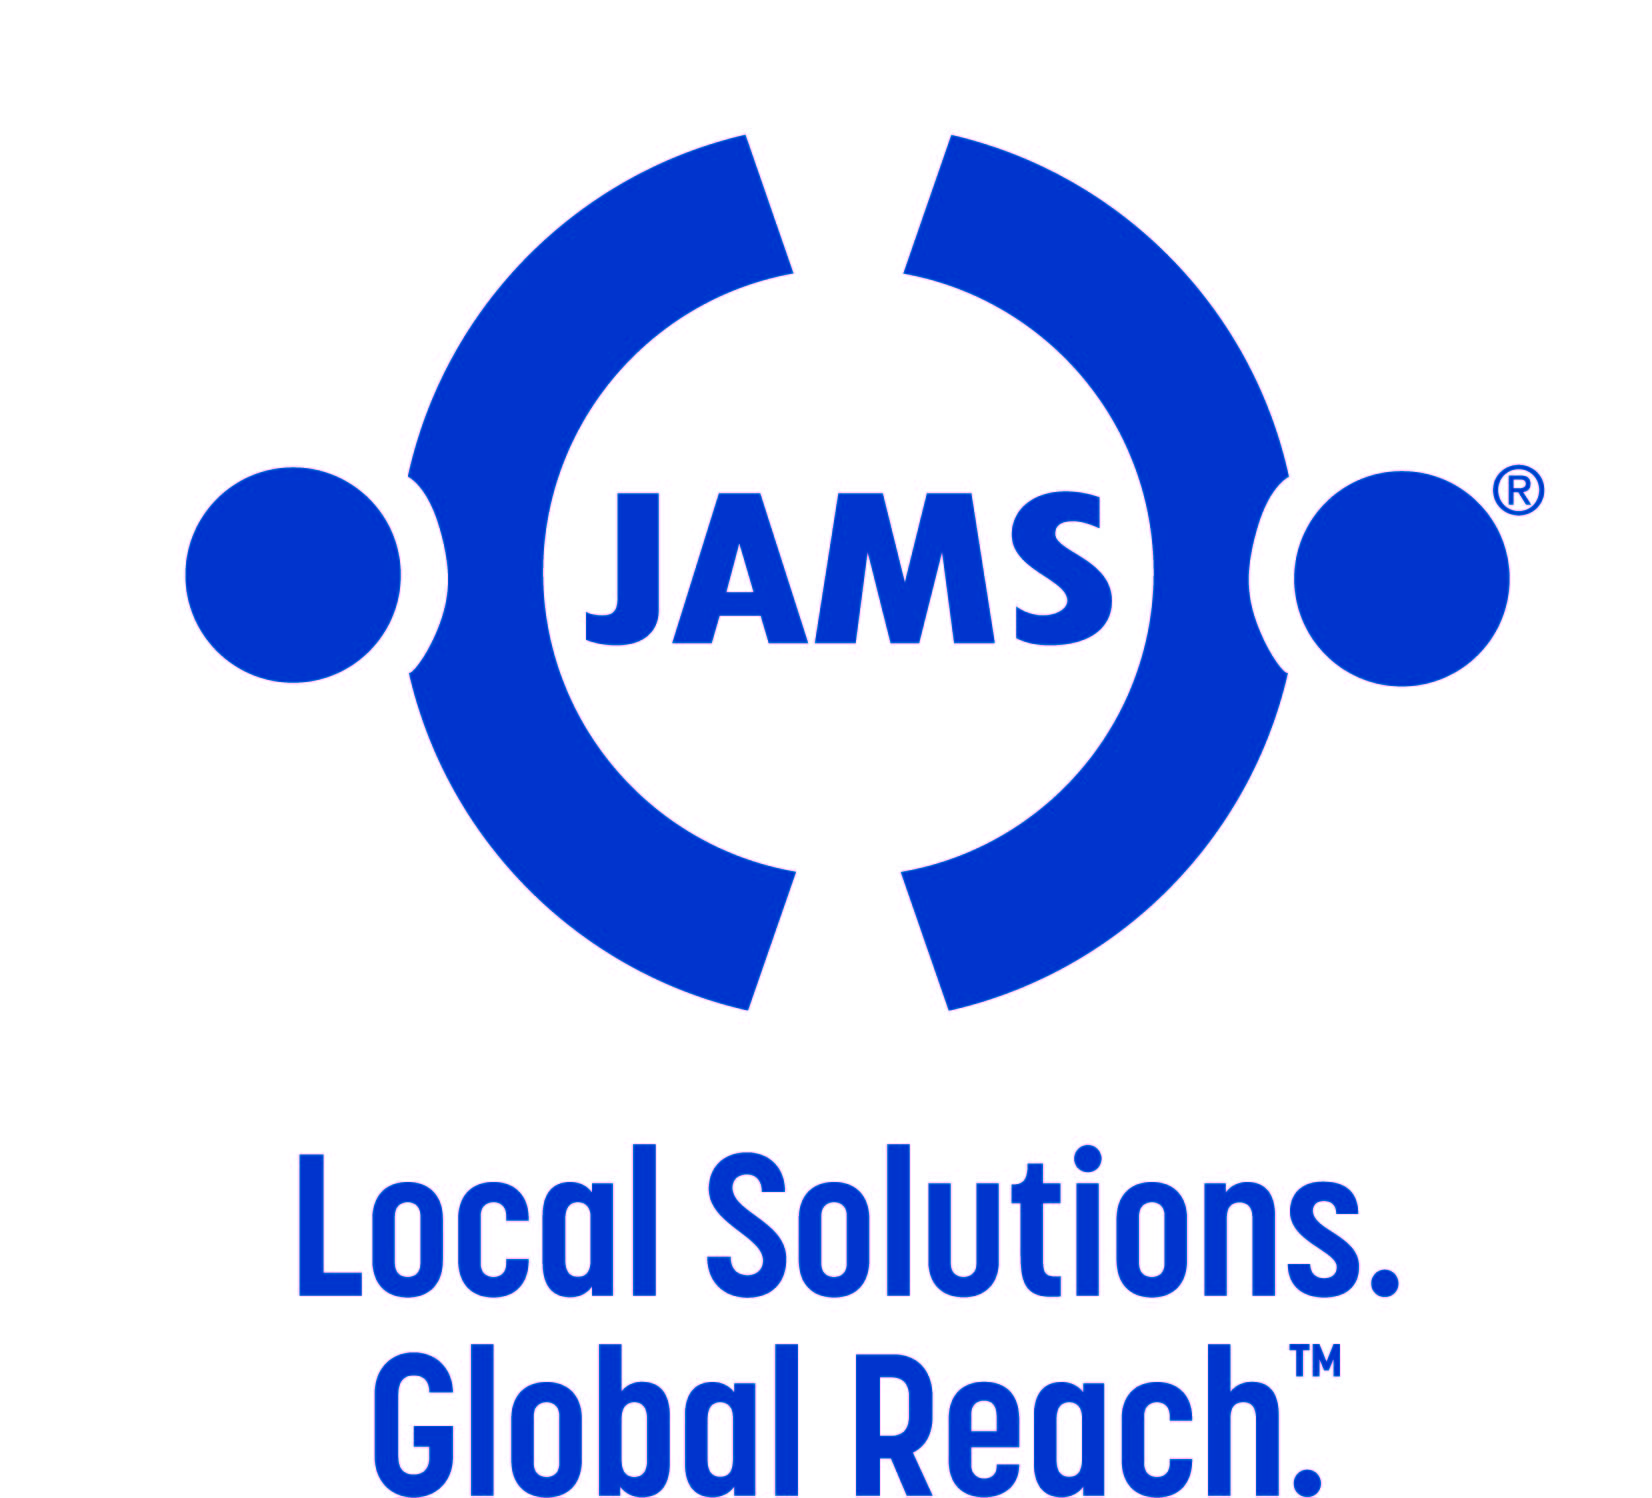 JAMS - Local Solutions. Global Reach.